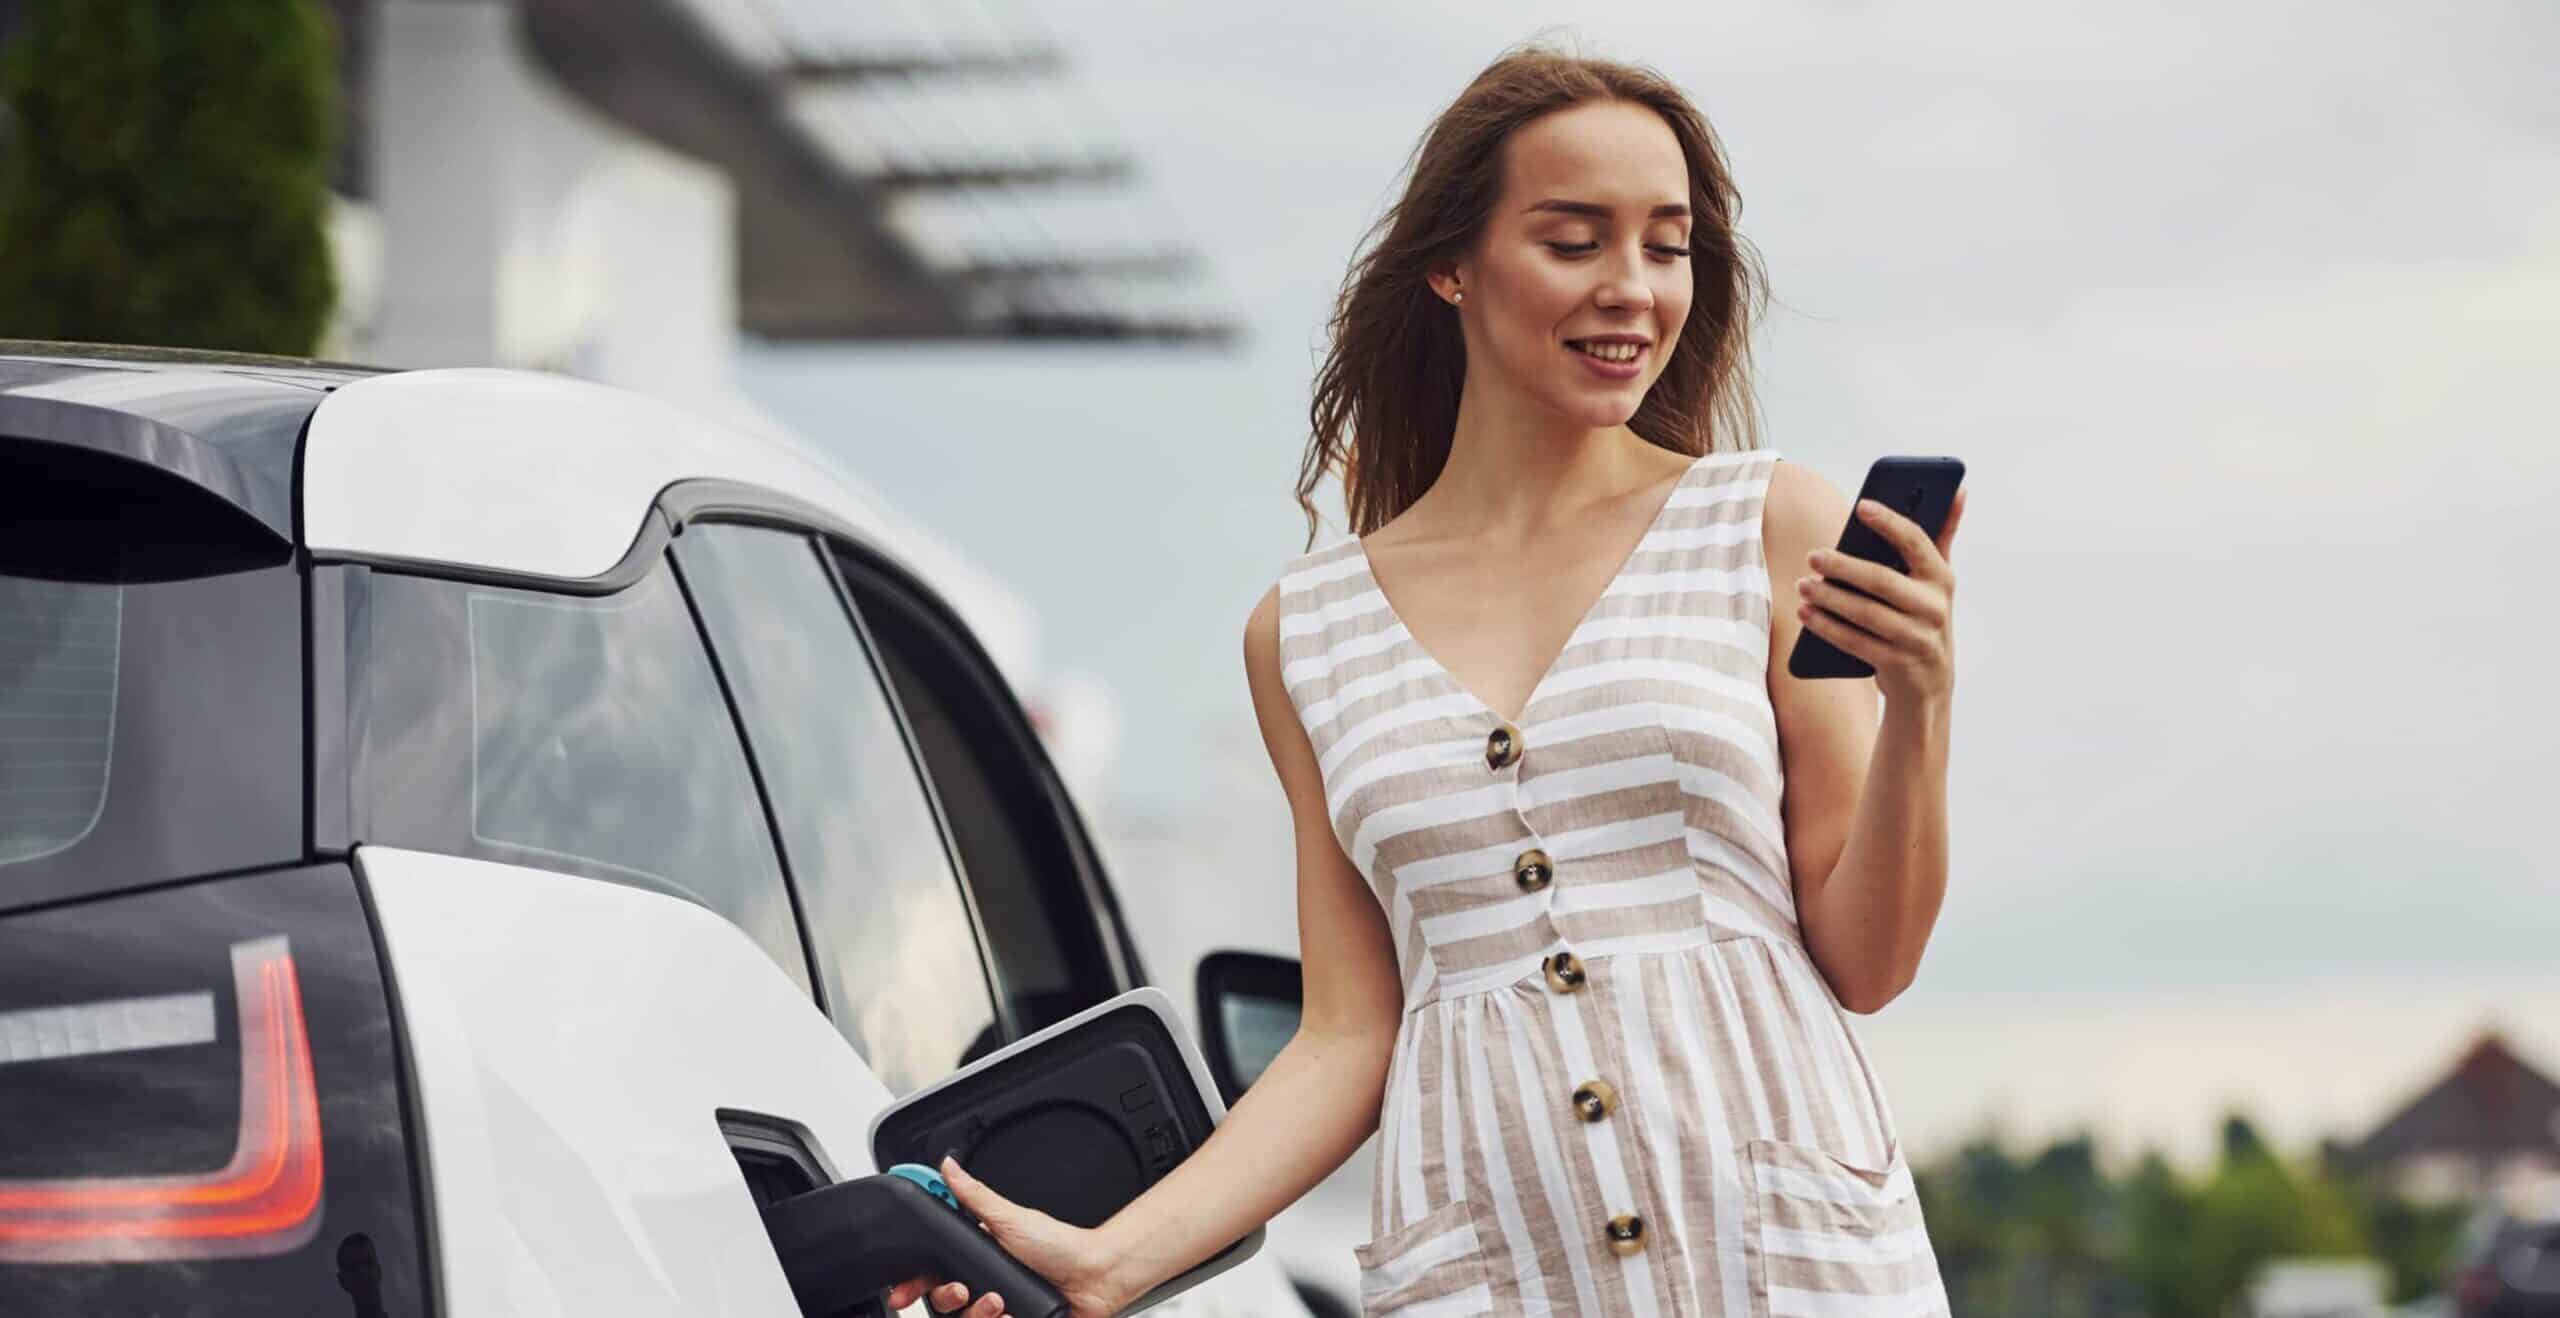 Young woman using SmartPhone & Charging EV